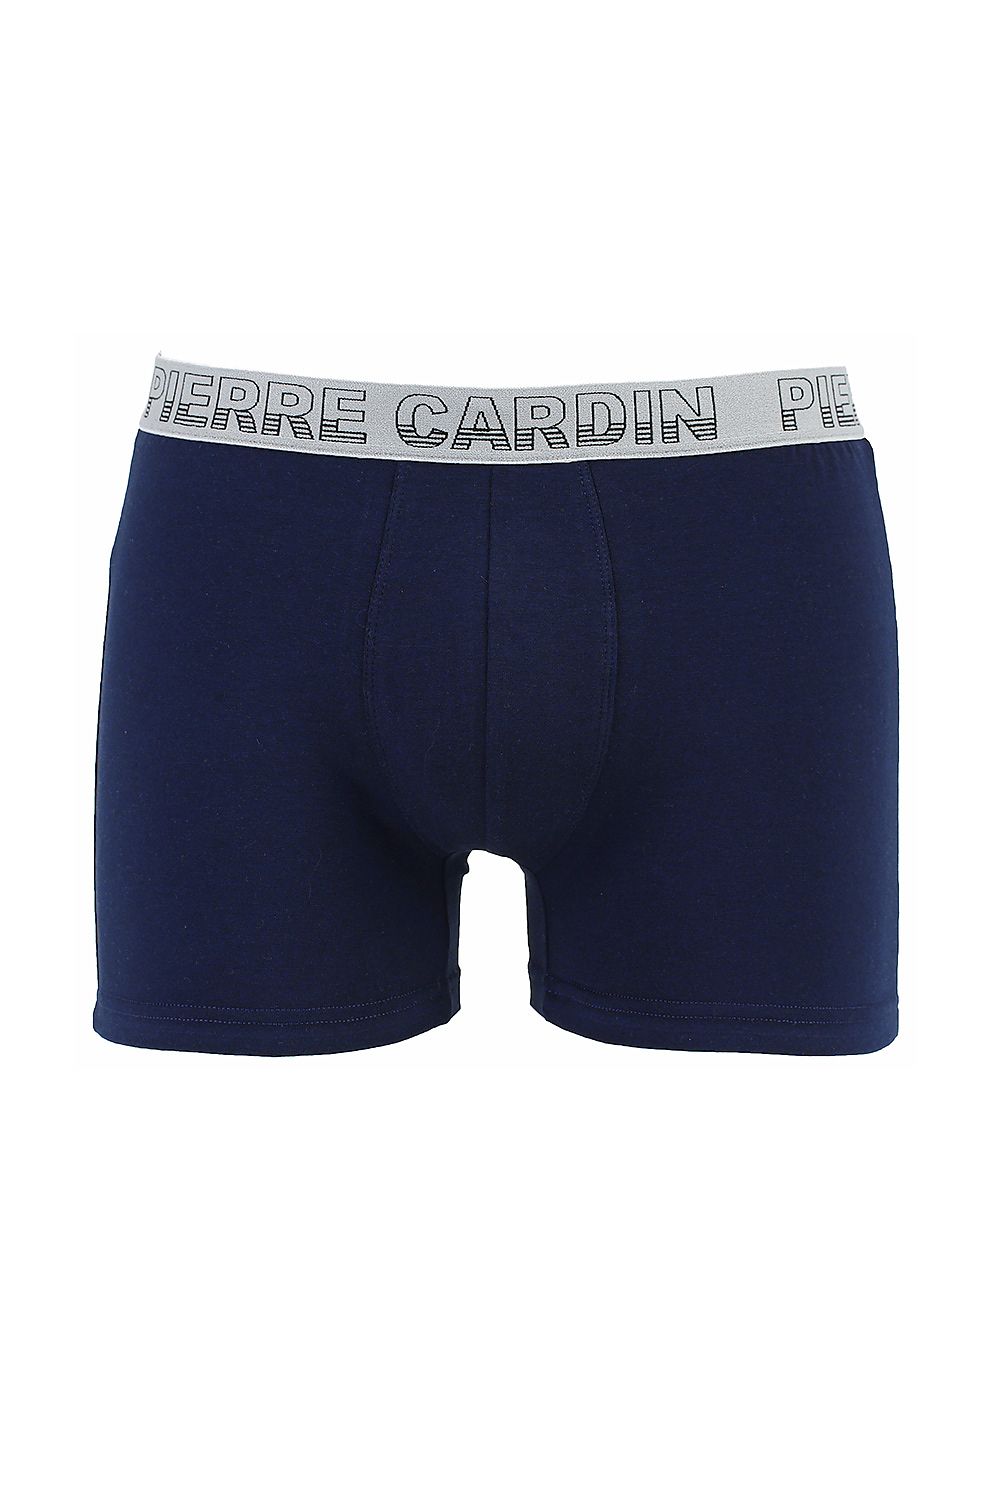 Boxers model 113745 Pierre Cardin Boxers Shorts, Slips, Swimming Briefs ...